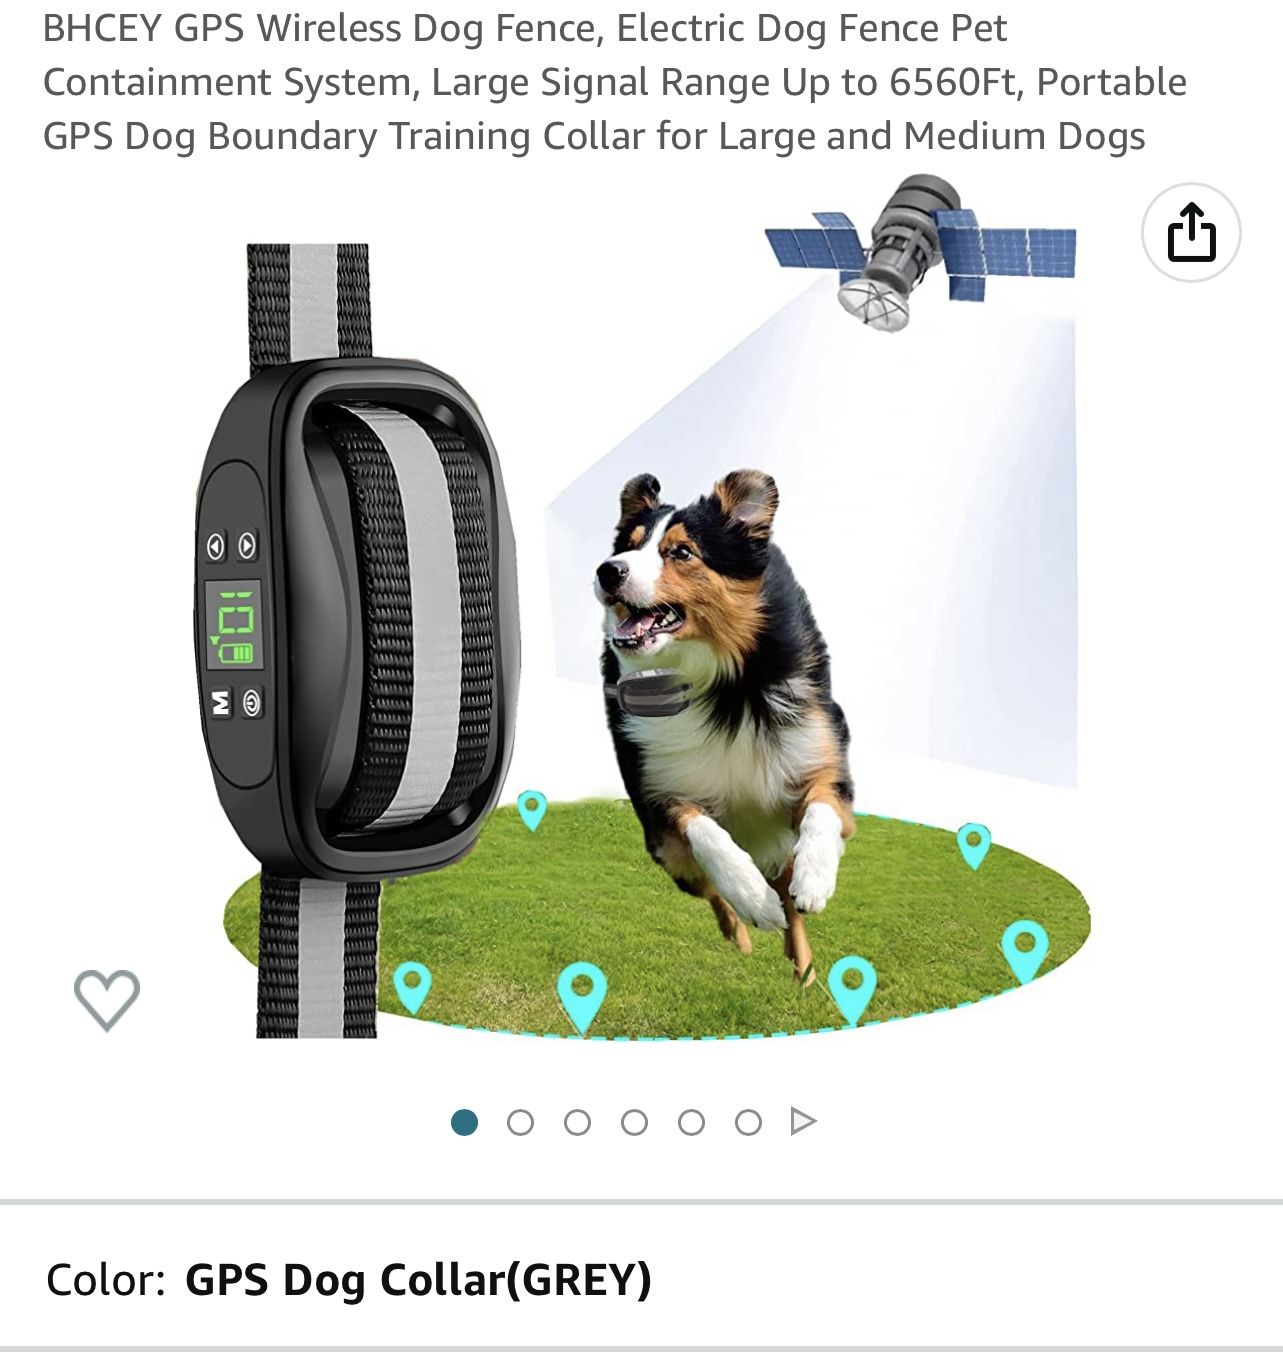 GPS Wireless Dog Fence, Electric Dog Fence Pet Containment System, Large  Signal Range Up to 6560Ft, Portable GPS Dog Boundary Training Collar for